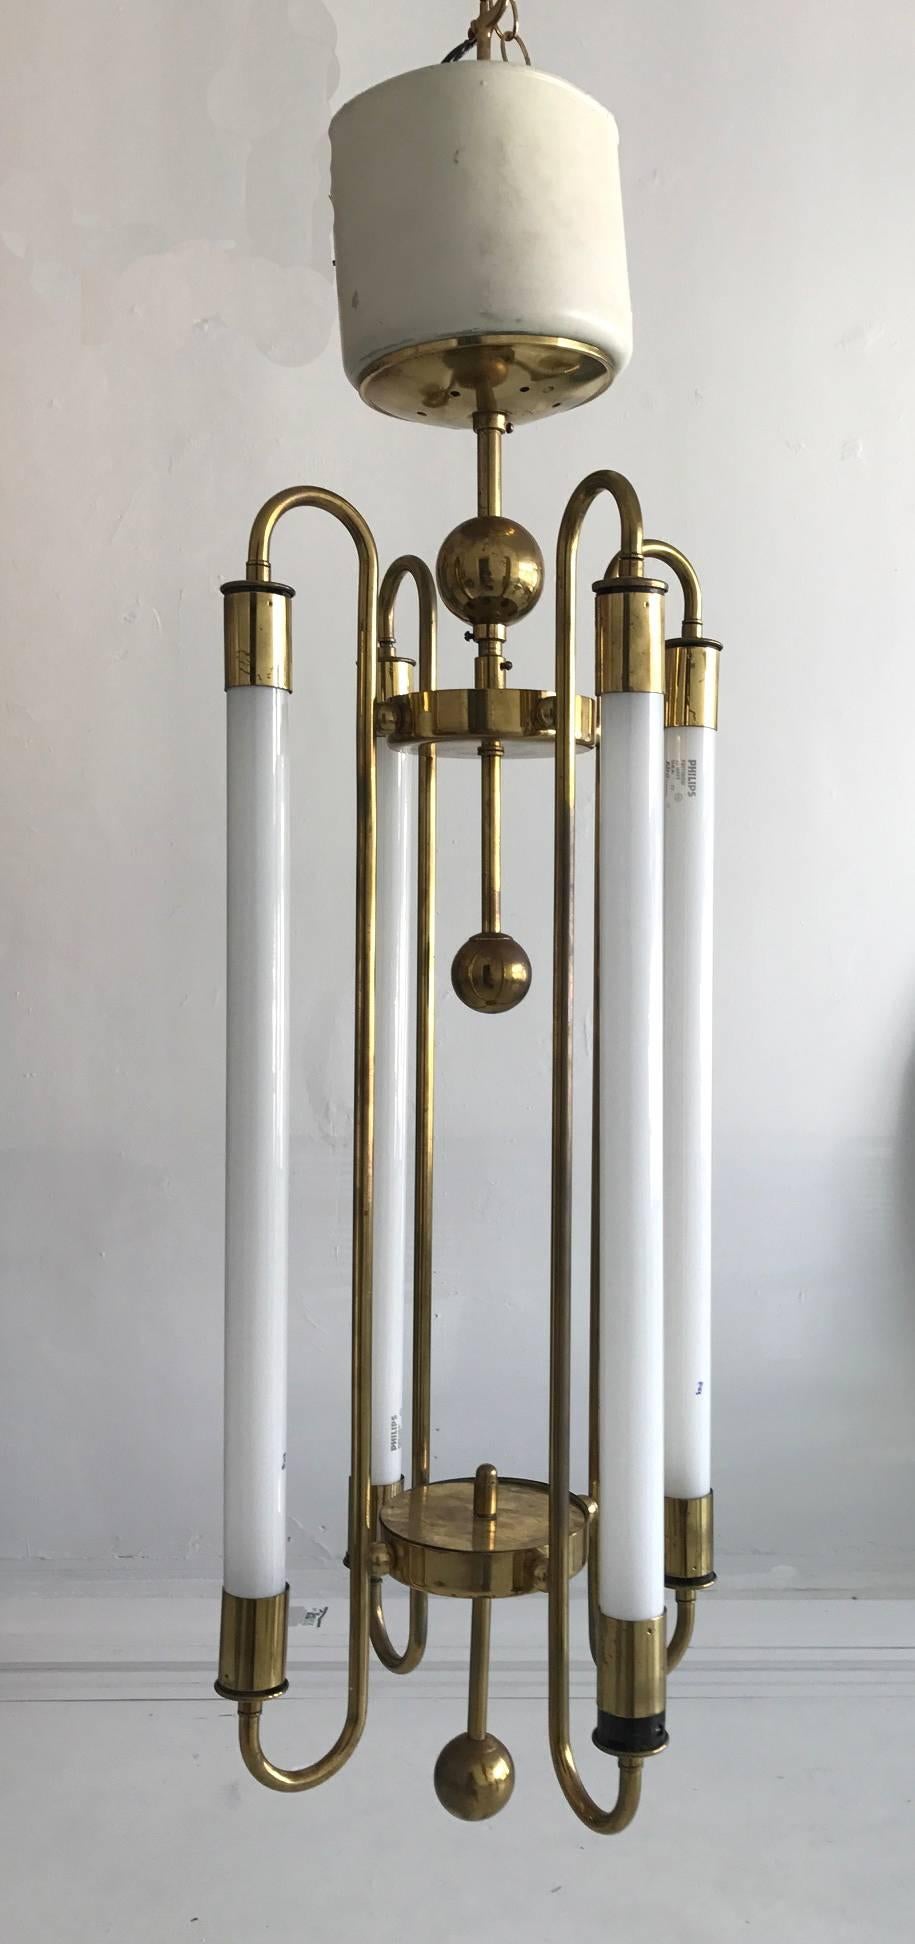 A brass and enameled chandelier by Kaiser & Co, made in Germany, circa 1930s. In the fashion of Art Deco transitioning into Modern and Bauhaus. Polished brass frame with large balls supports four fluorescent tubes. It makes a beautiful ceiling